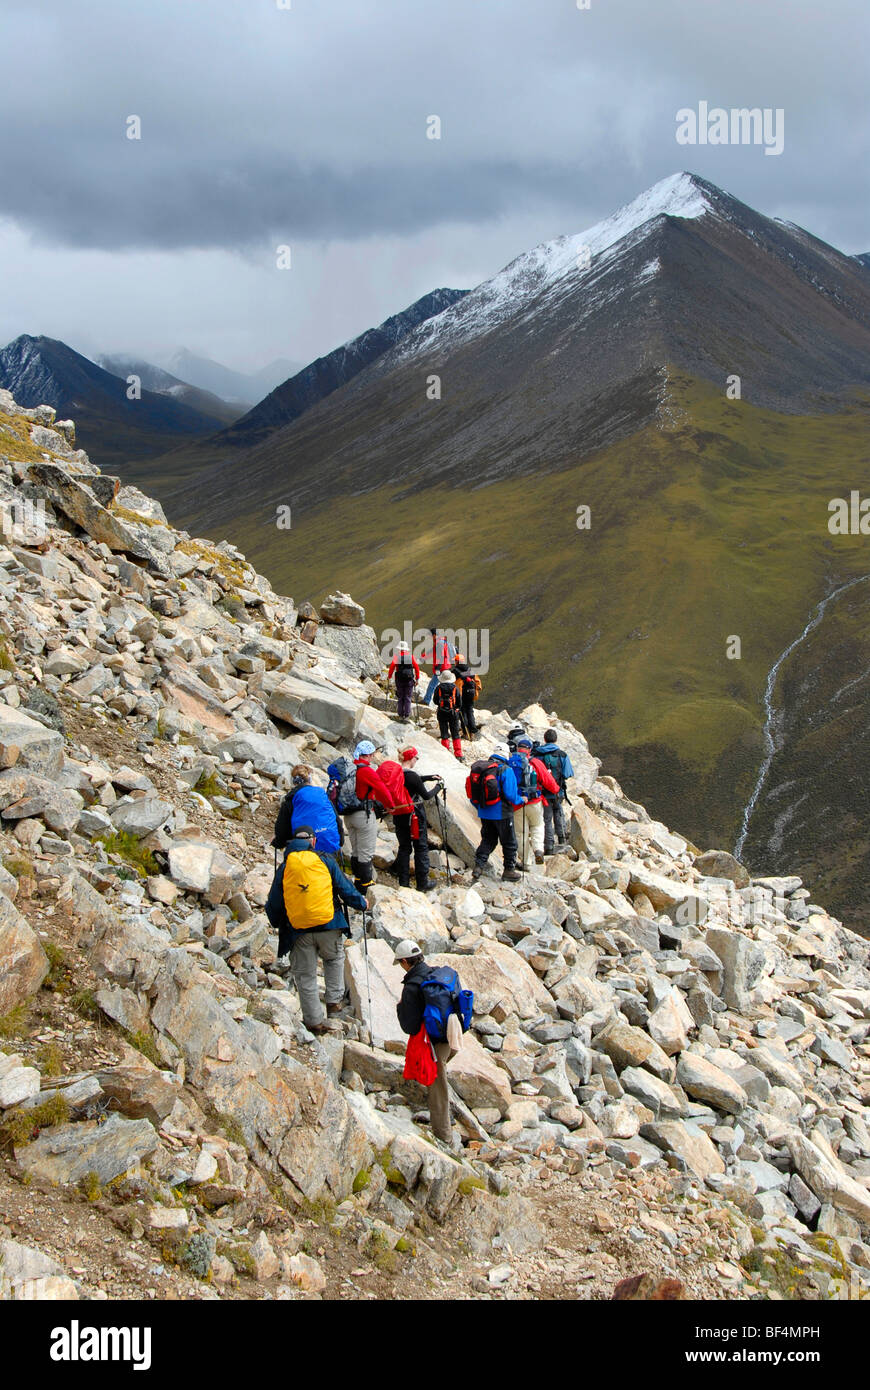 Trekking tourism, group of hikers, stony path, Shug-La Pass 5250 m, an old pilgrims' path through the high mountains of the Gan Stock Photo